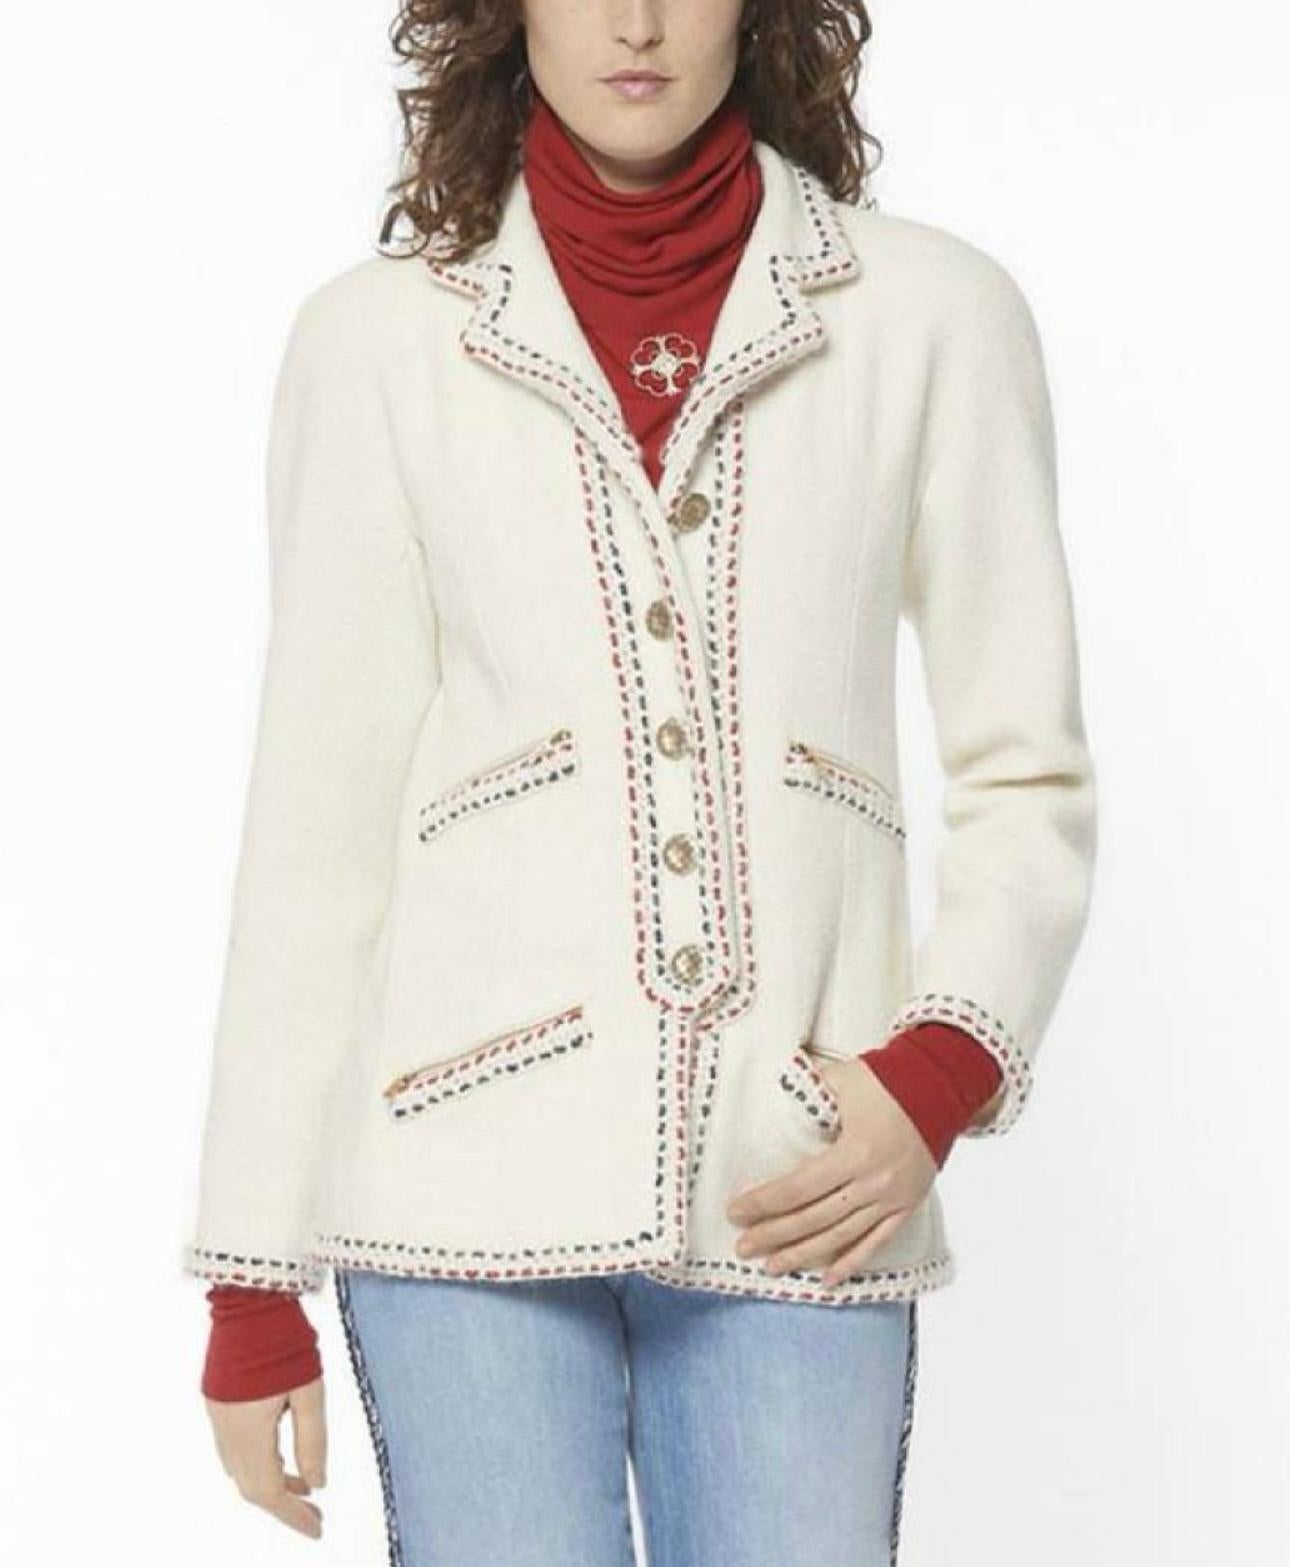 Chanel CC Buttons Timeless Little White Jacket  In Excellent Condition For Sale In Dubai, AE